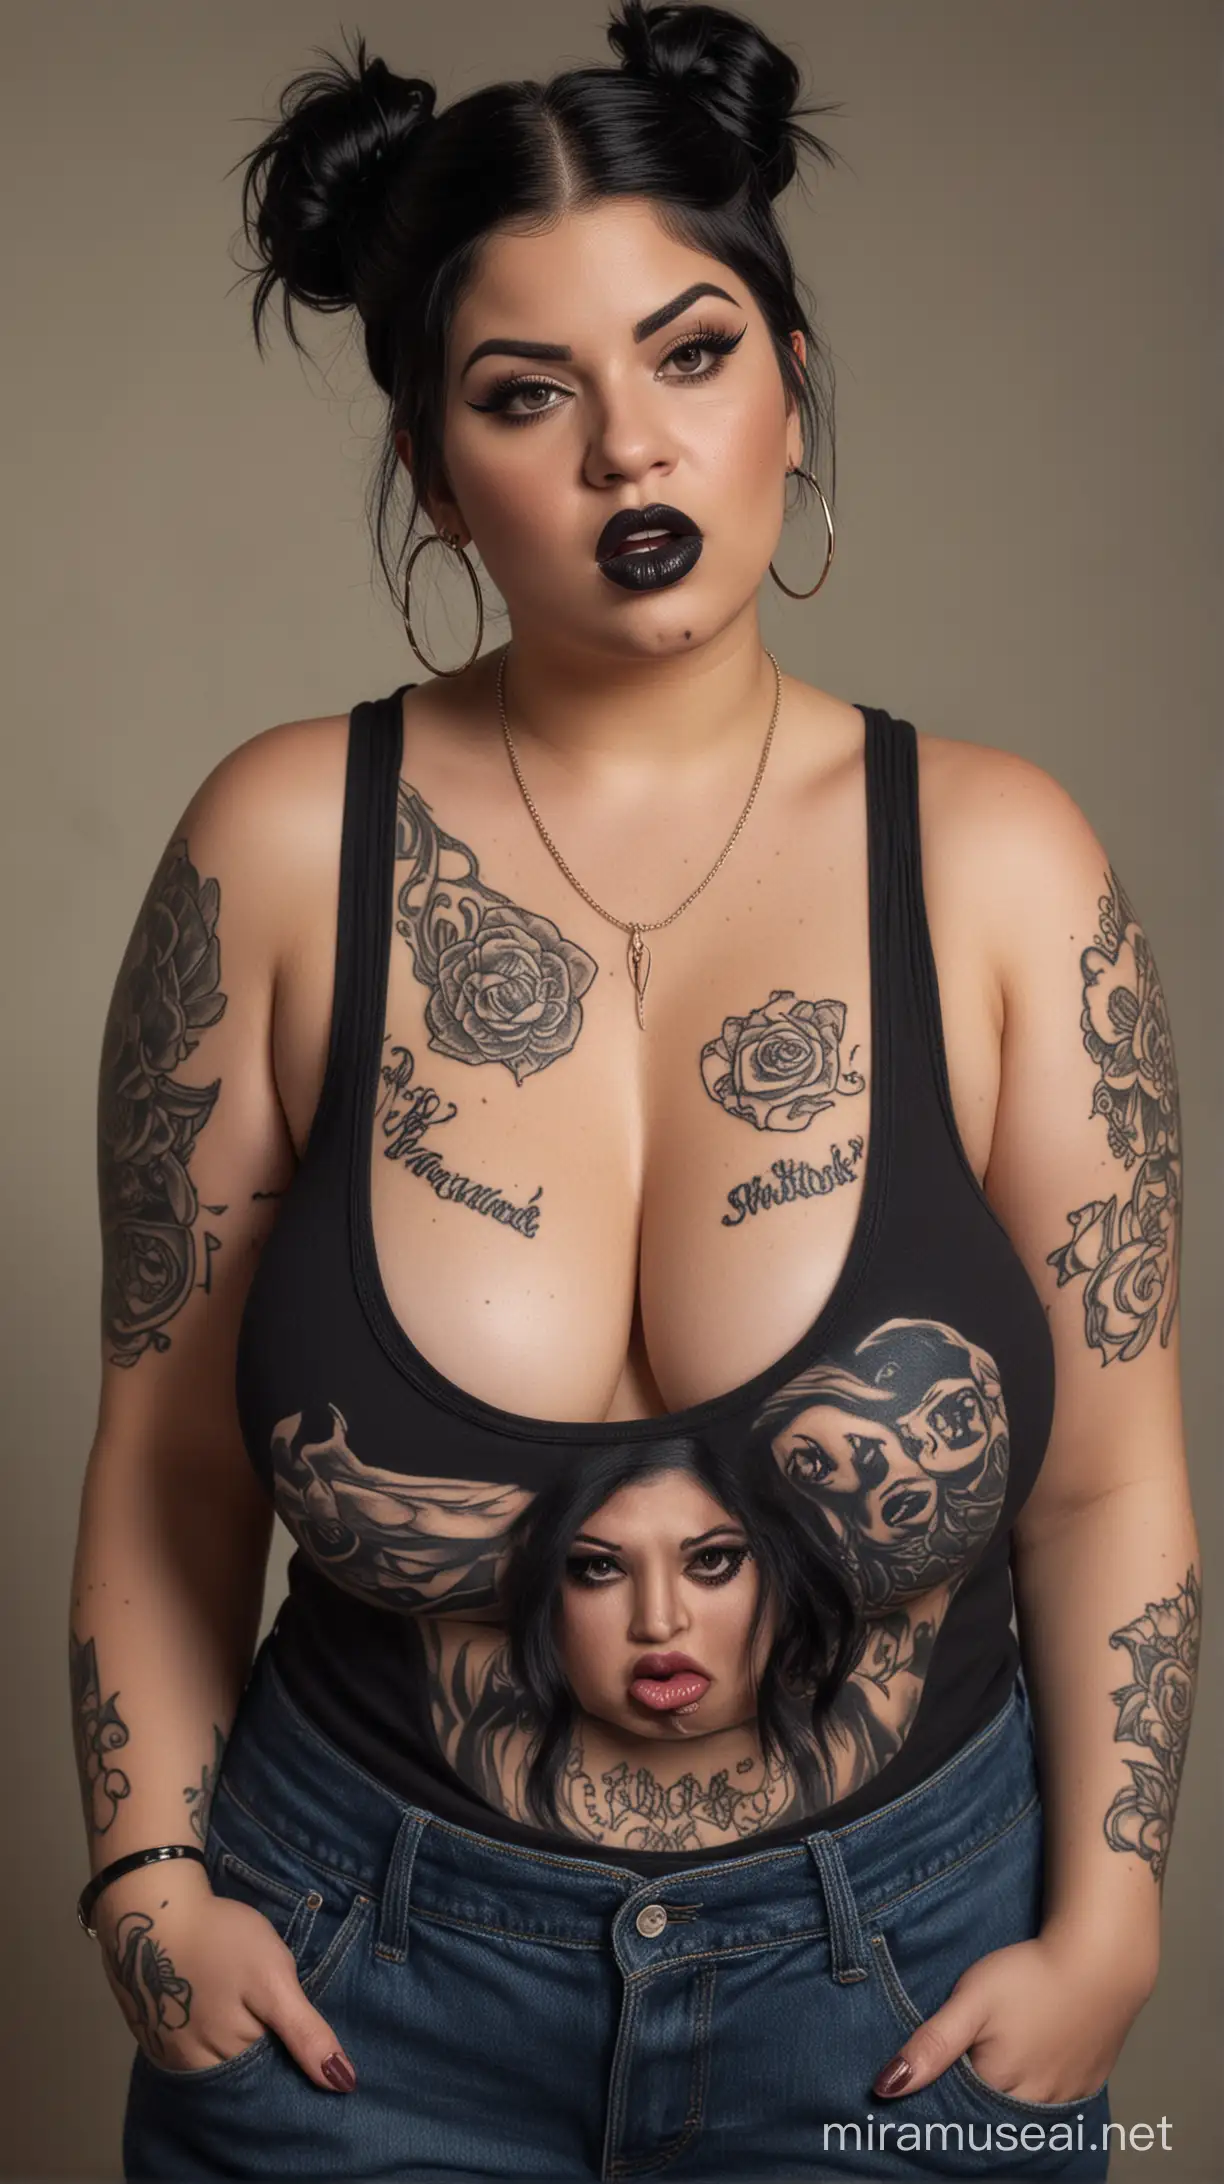 Angry Chola Woman with Renaissance Style in Full Body Portrait